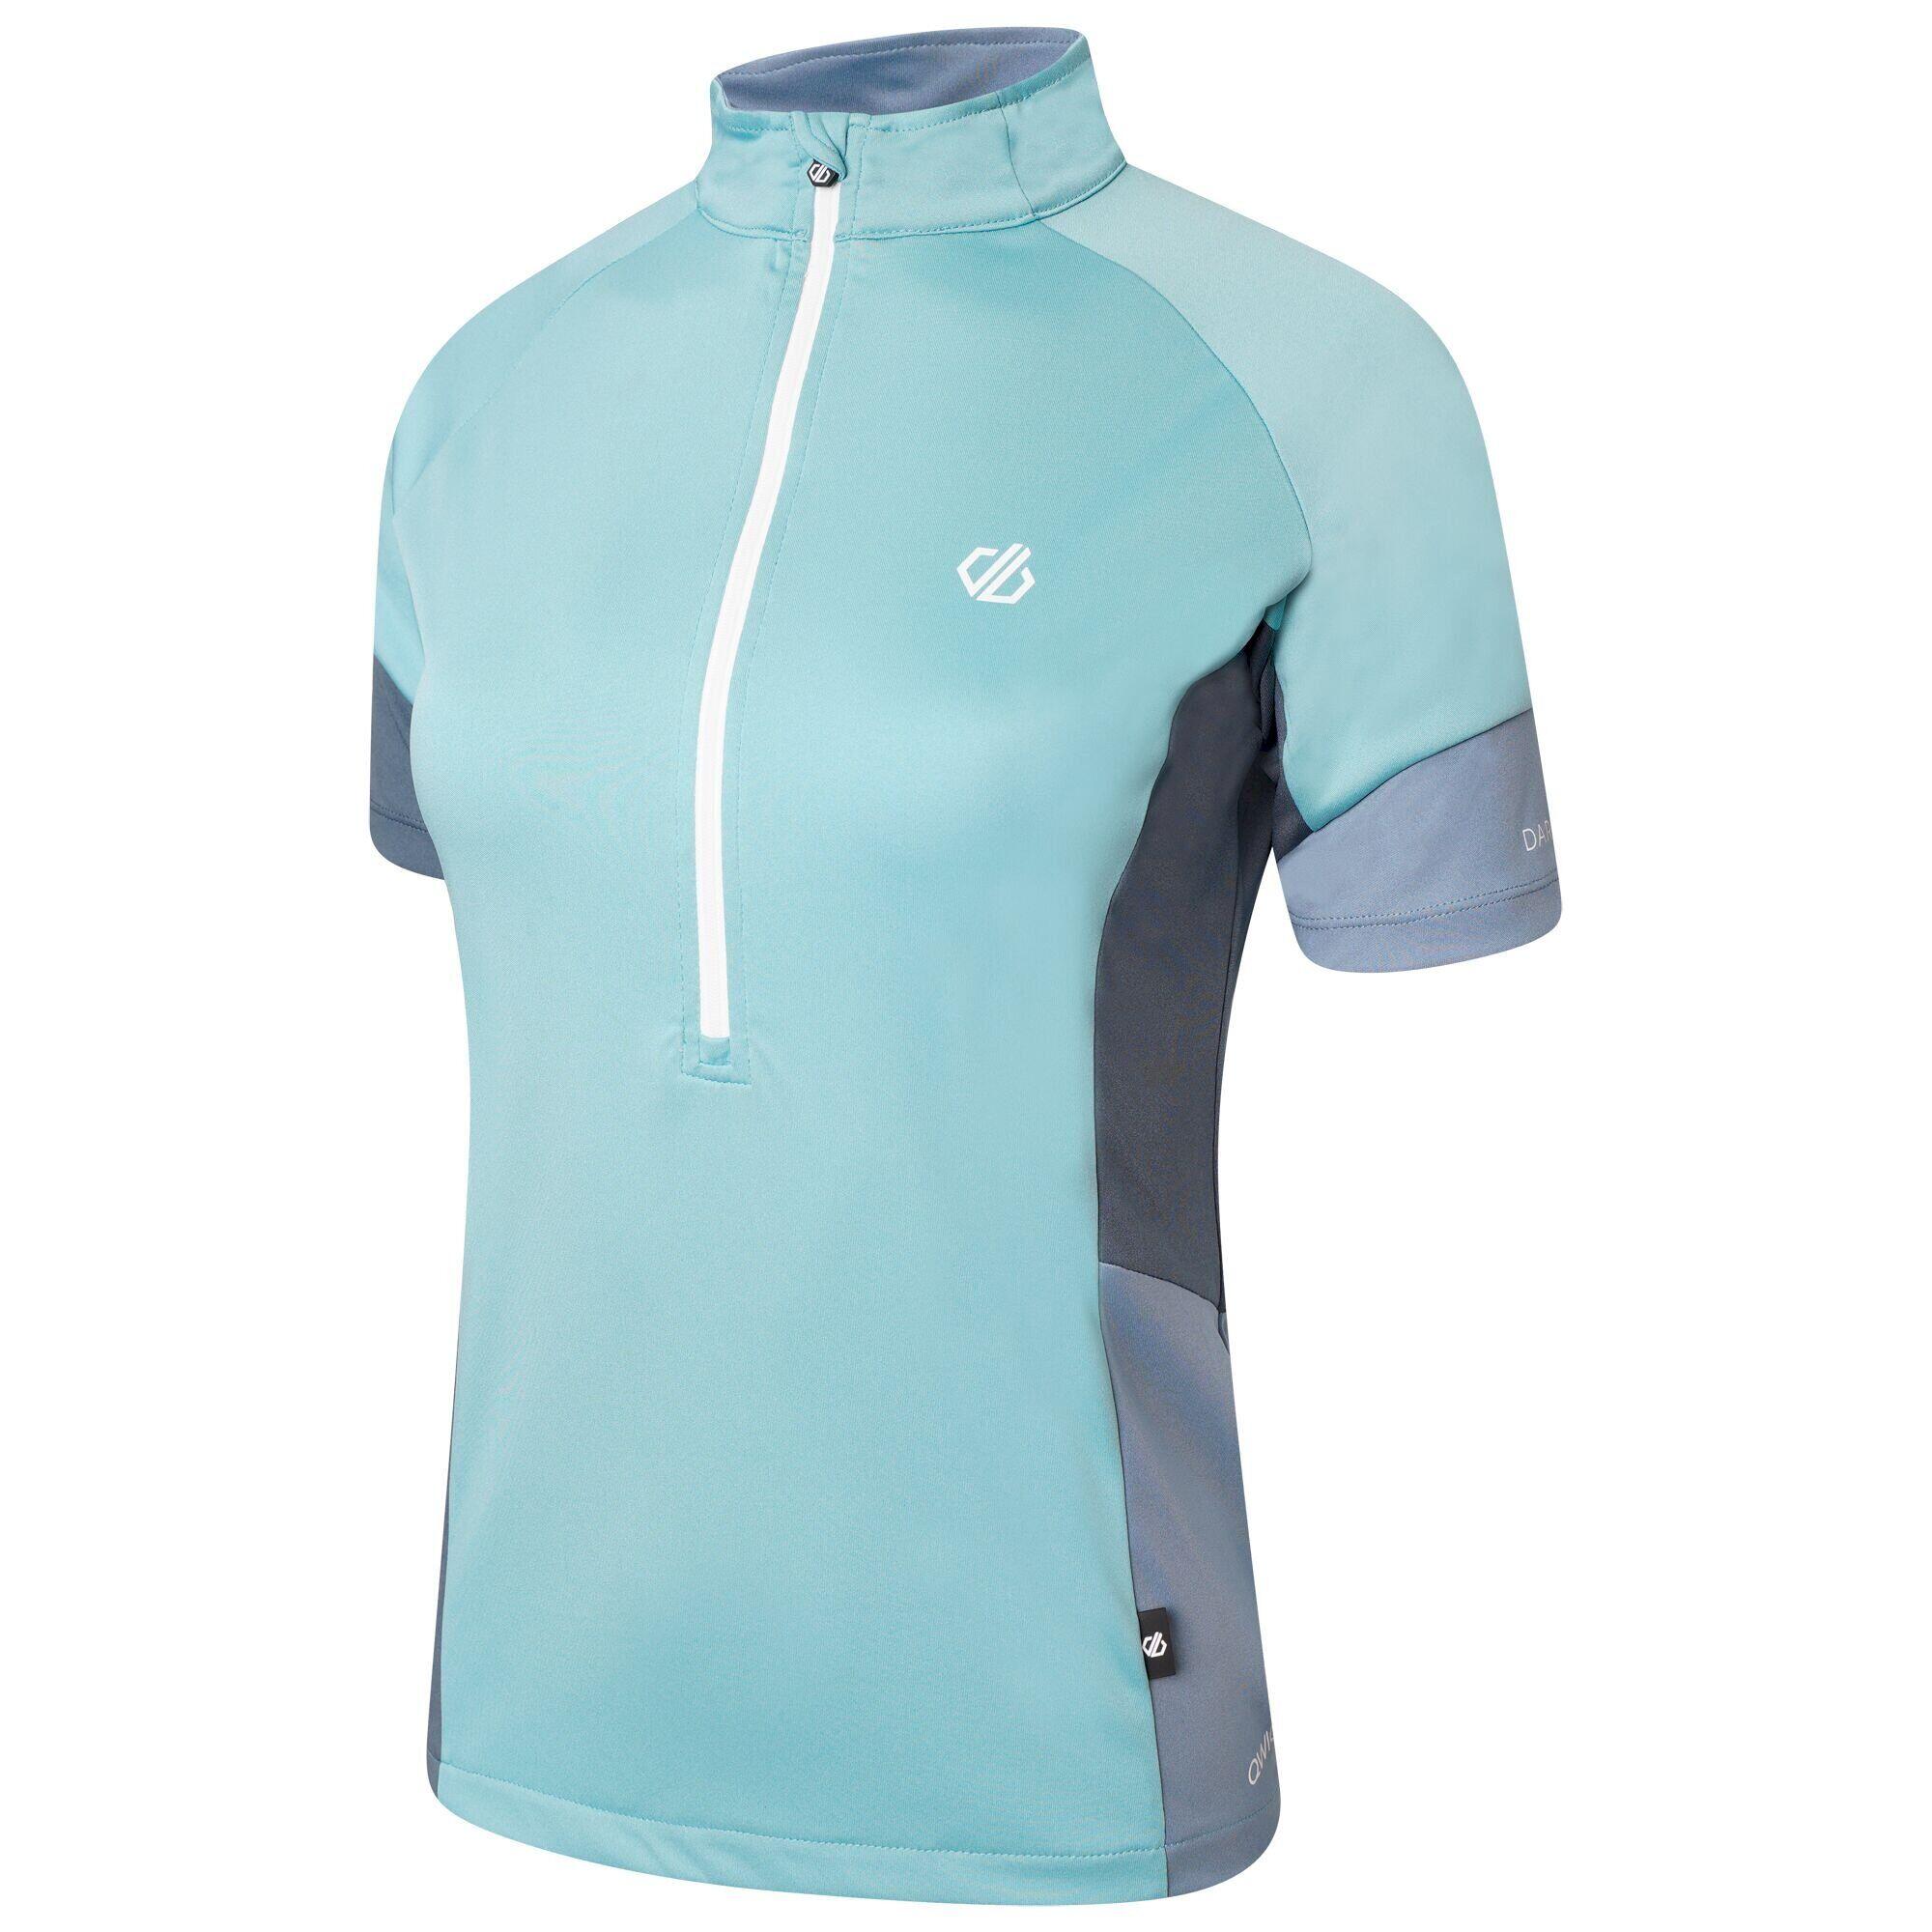 Womens/Ladies Compassion II Lightweight Jersey (Meadowbrook Green/Blue) 3/5